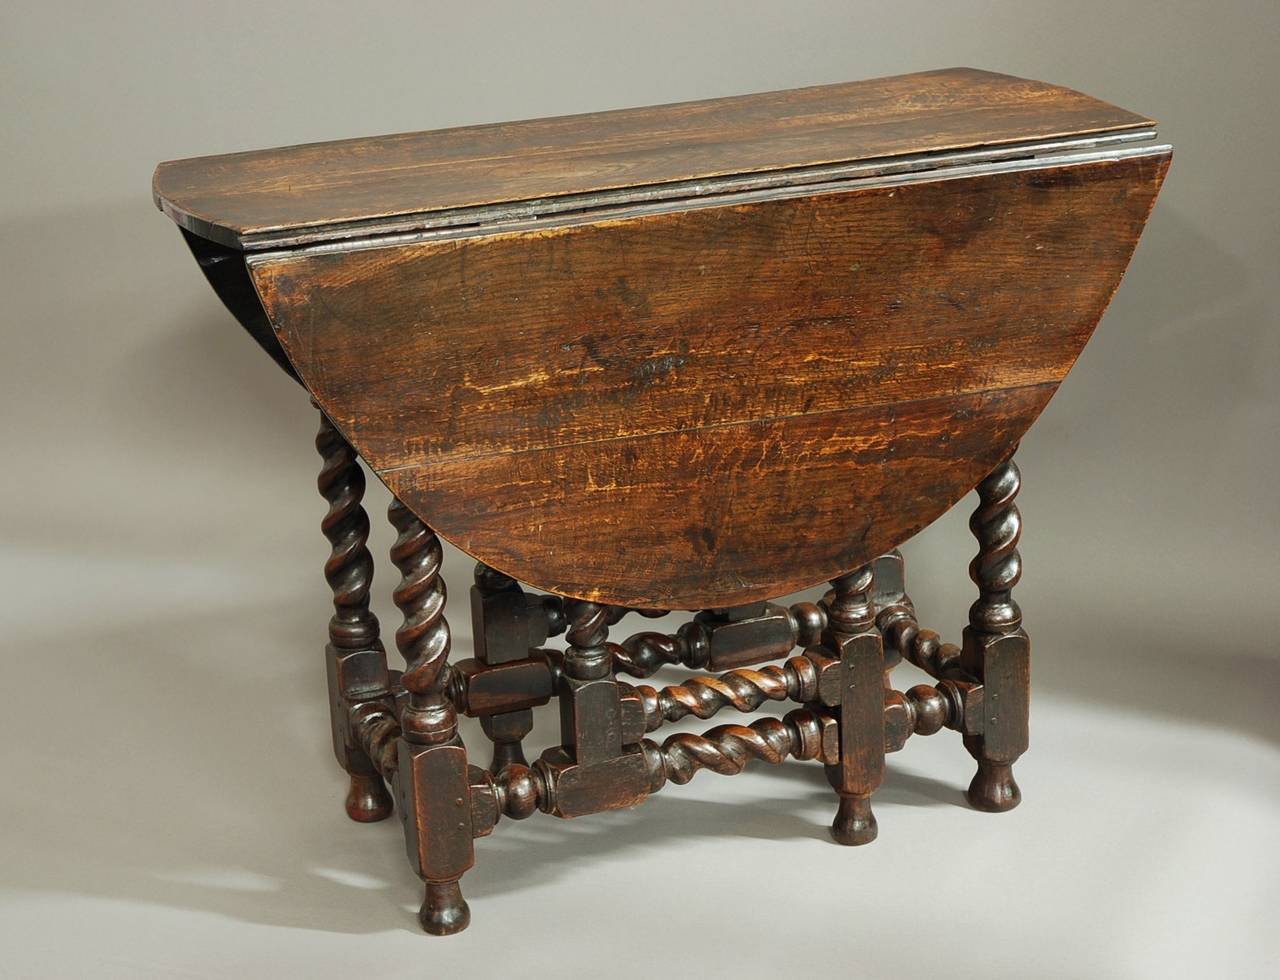 An unusual late 17th century oak gateleg table of small proportions and good patina (color).

This table consists of an oval plank top of good color with a drawer at one end and is supported by unusual barley twist turned legs and